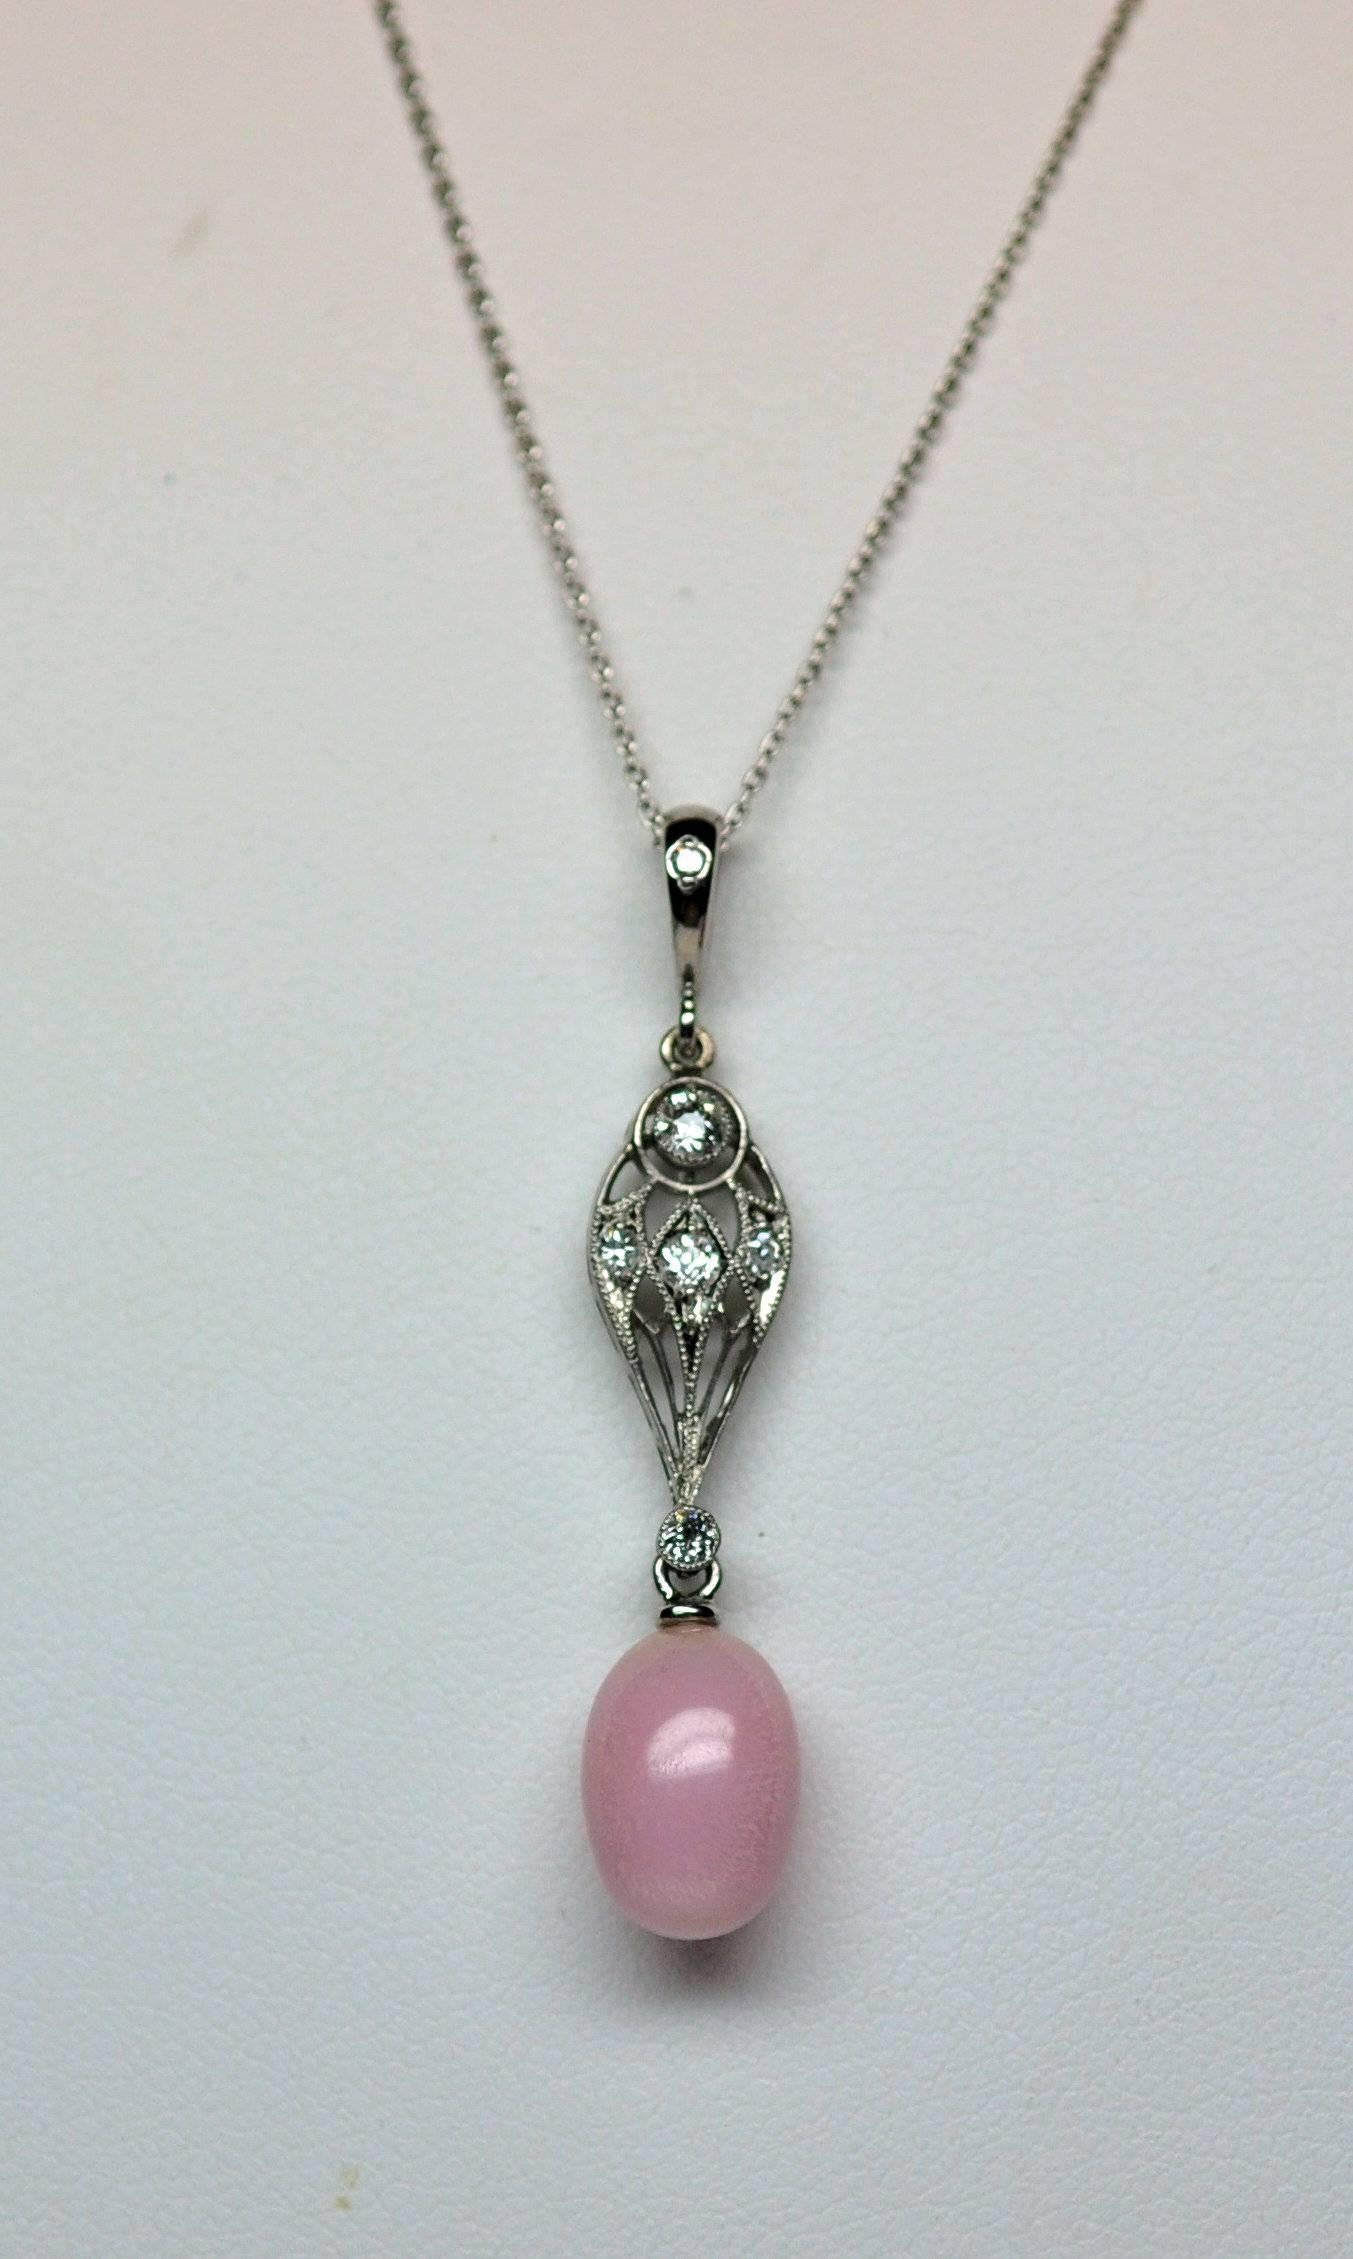 A fine quality natural conch pearl occurs only once in 100,000 conch pearls.  This pearl has the most desired pink color and perfect oval shape. Note the flame characteristic.  Antique platinum pendant with diamonds.  Modern platinum bail set with